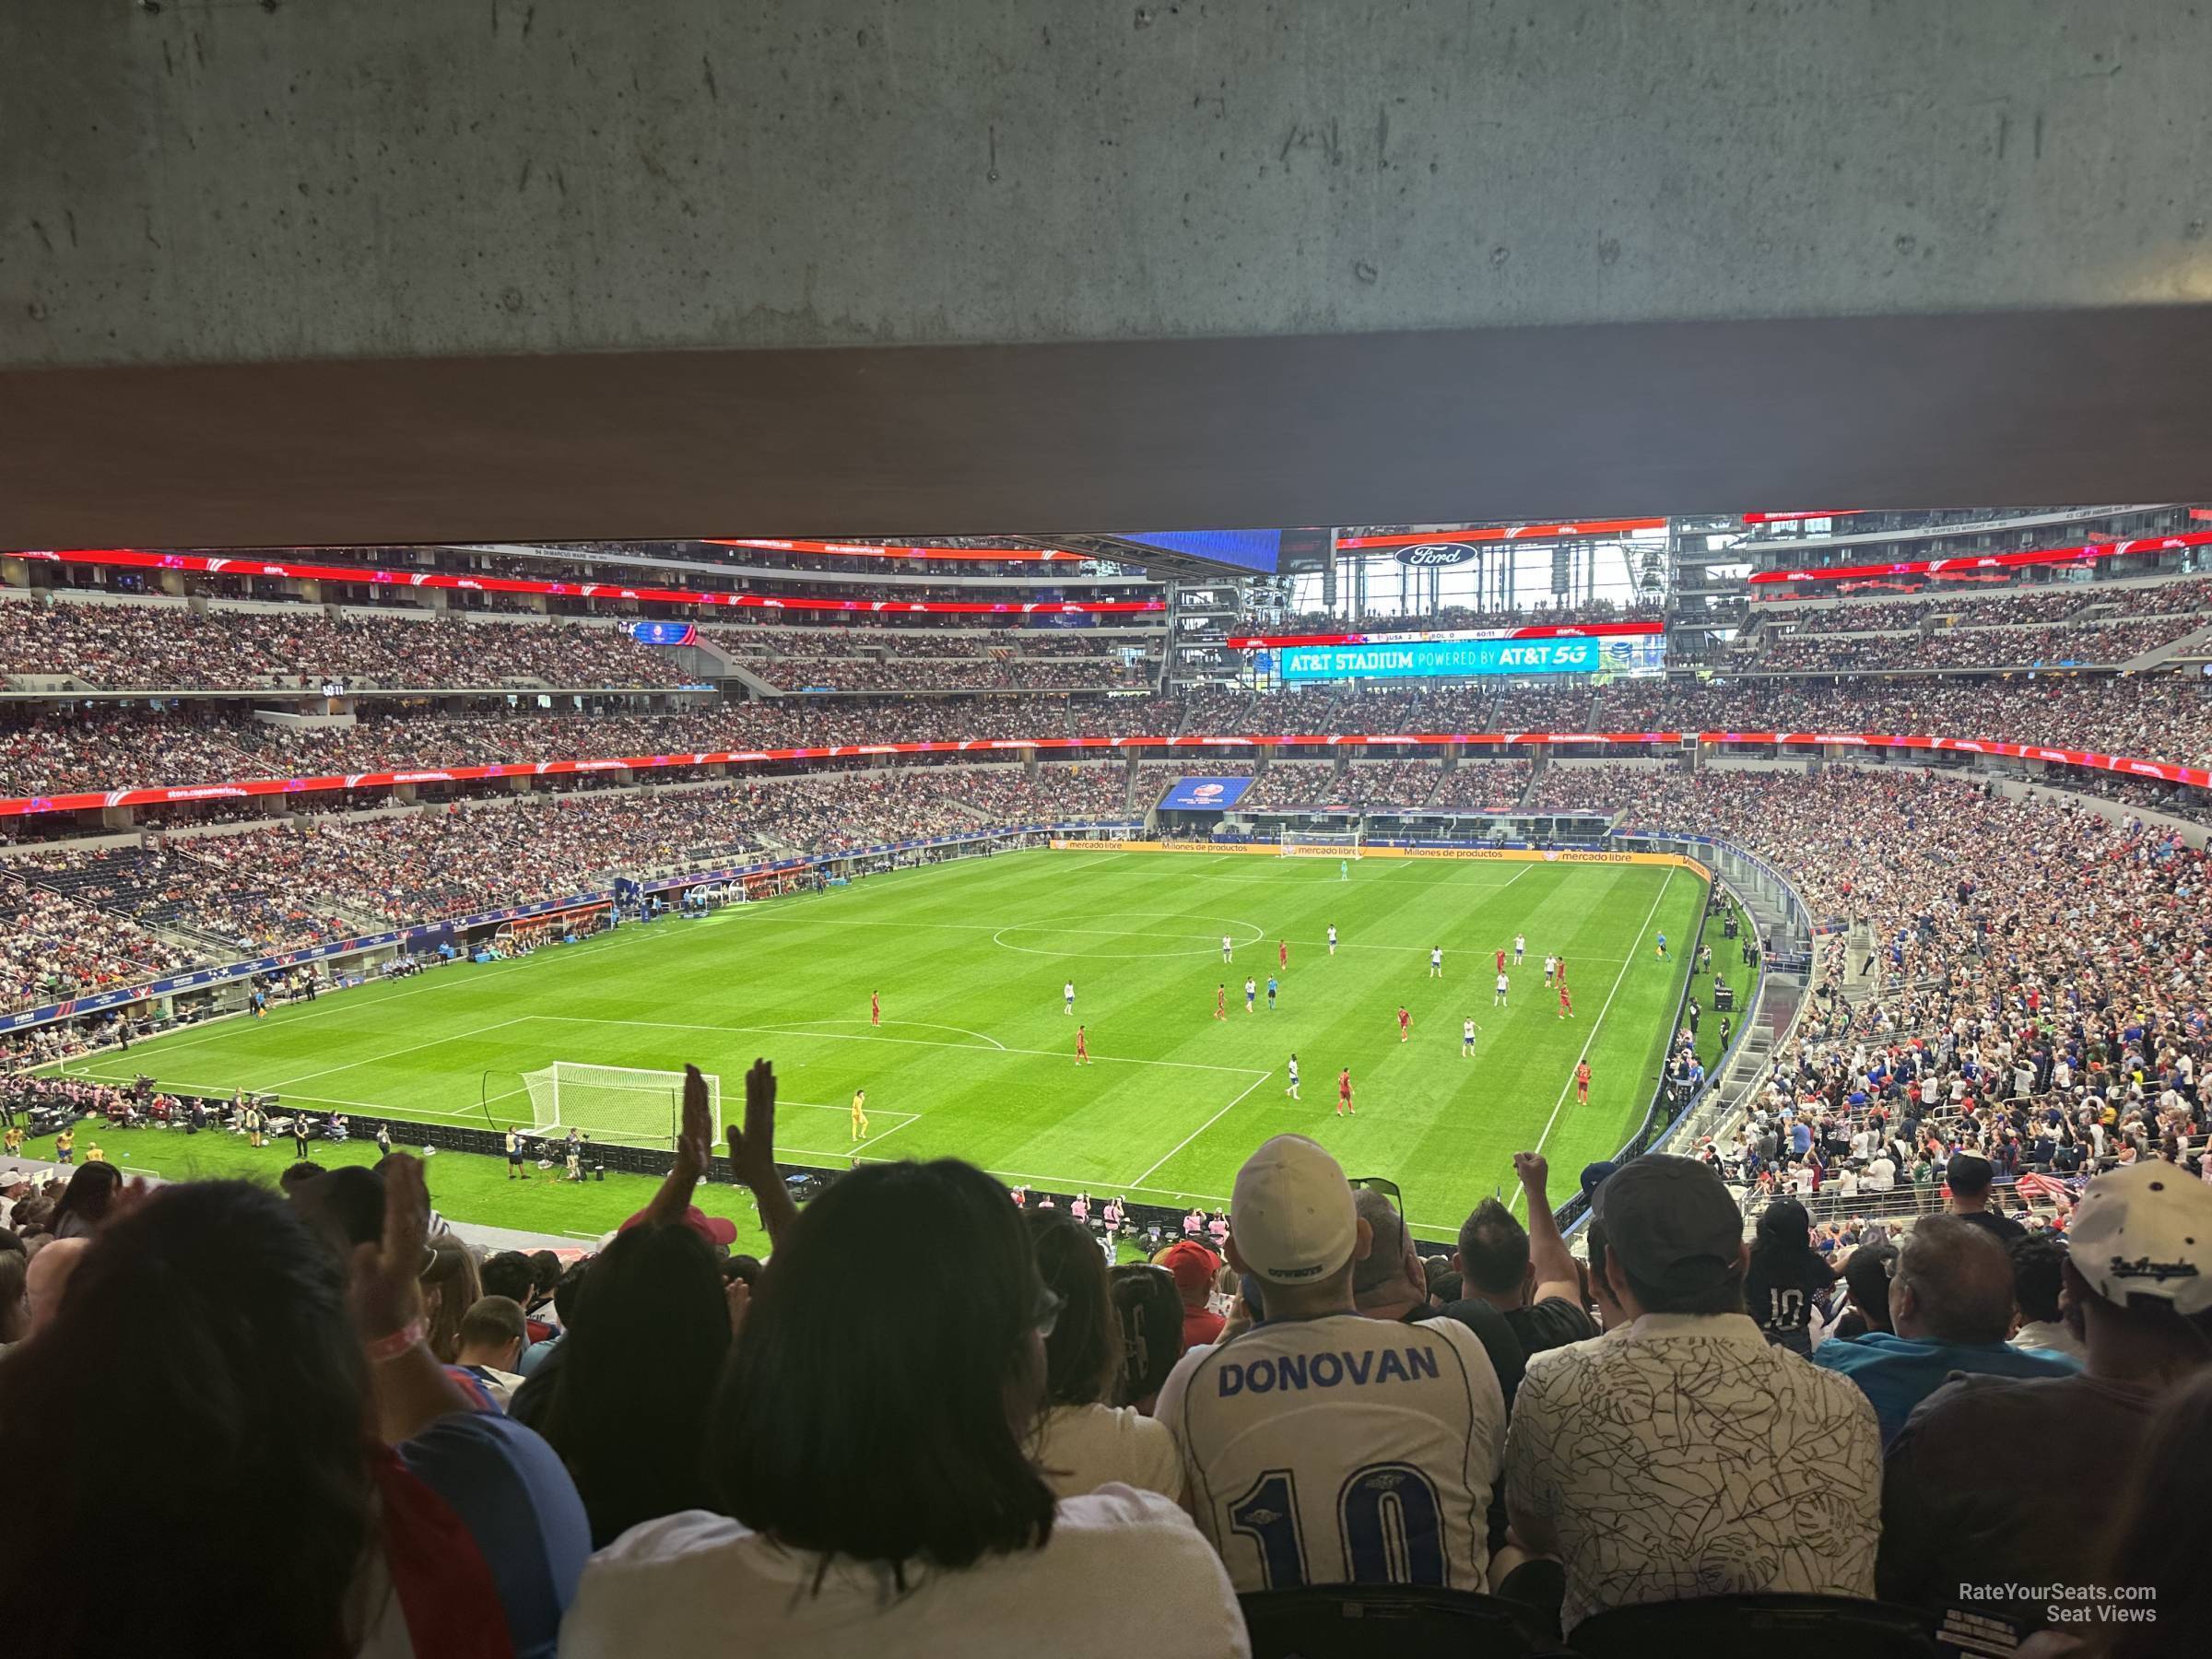 section 219, row 15 seat view  for soccer - at&t stadium (cowboys stadium)